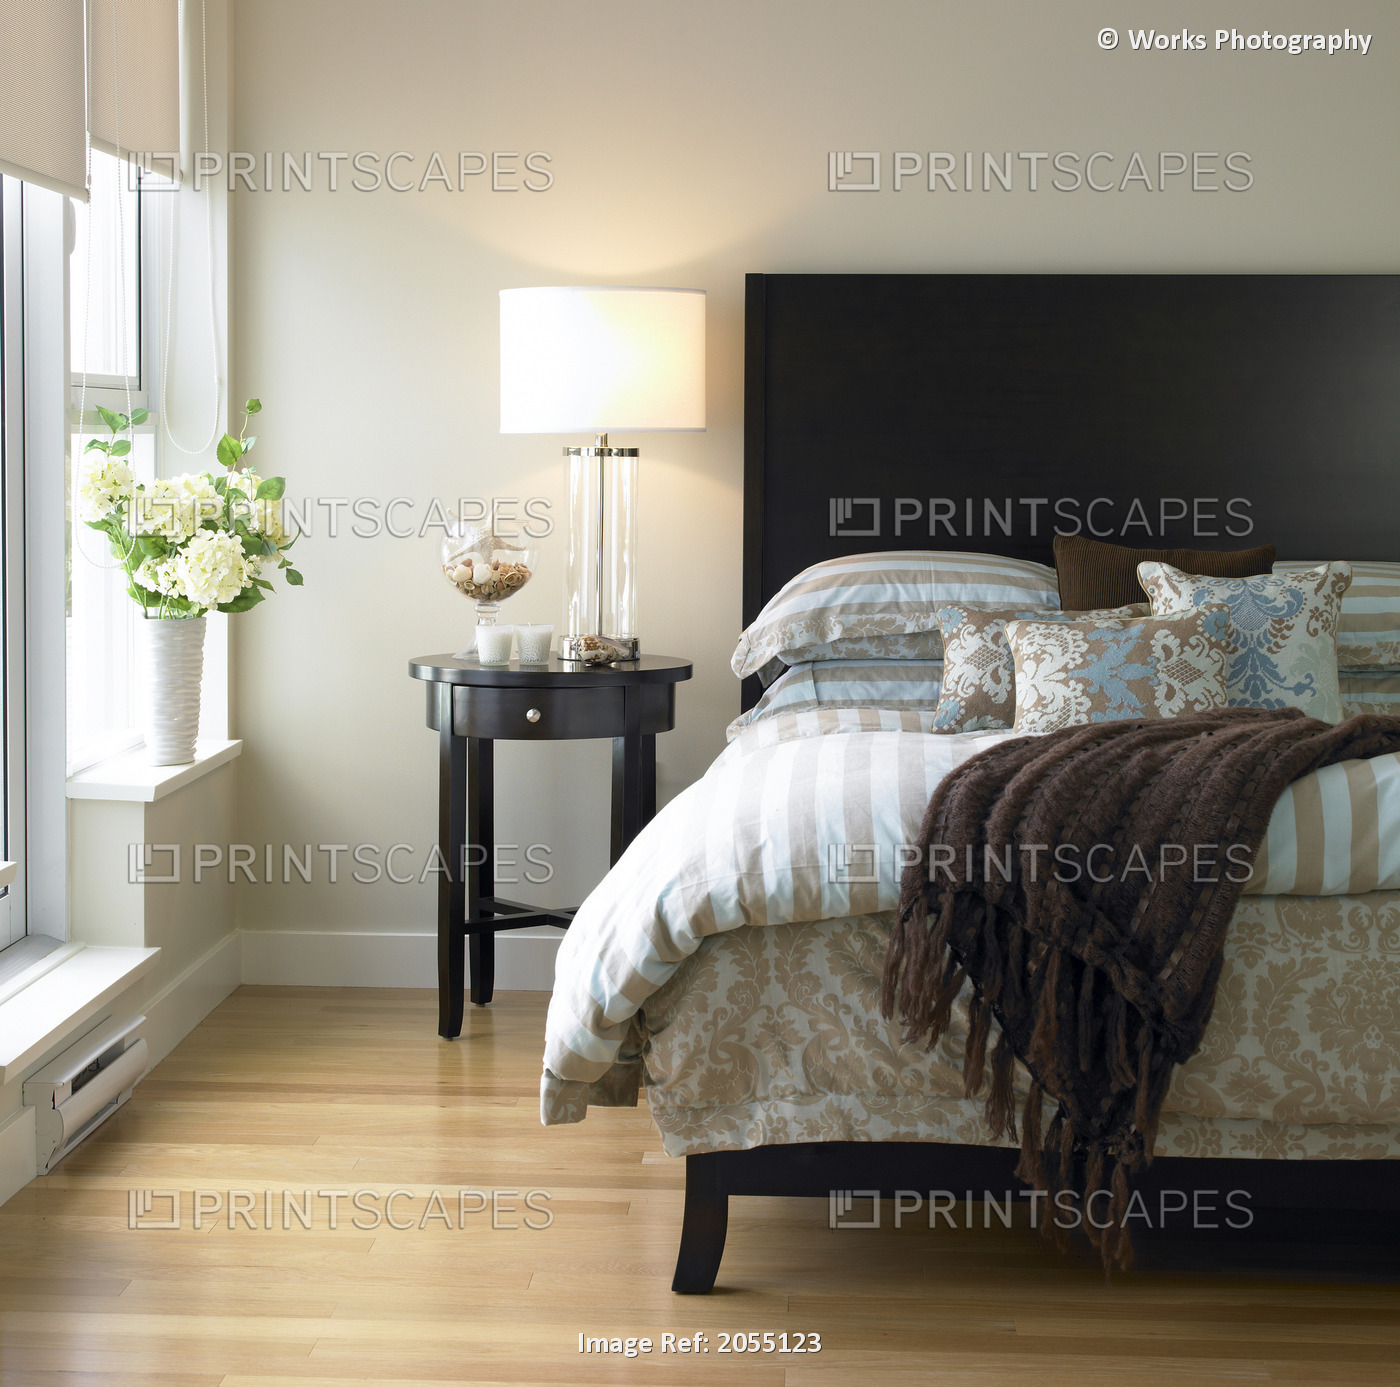 Bedroom With Blue And Brown Bedding, Bedside Table And Hydrangeas In Vase, ...